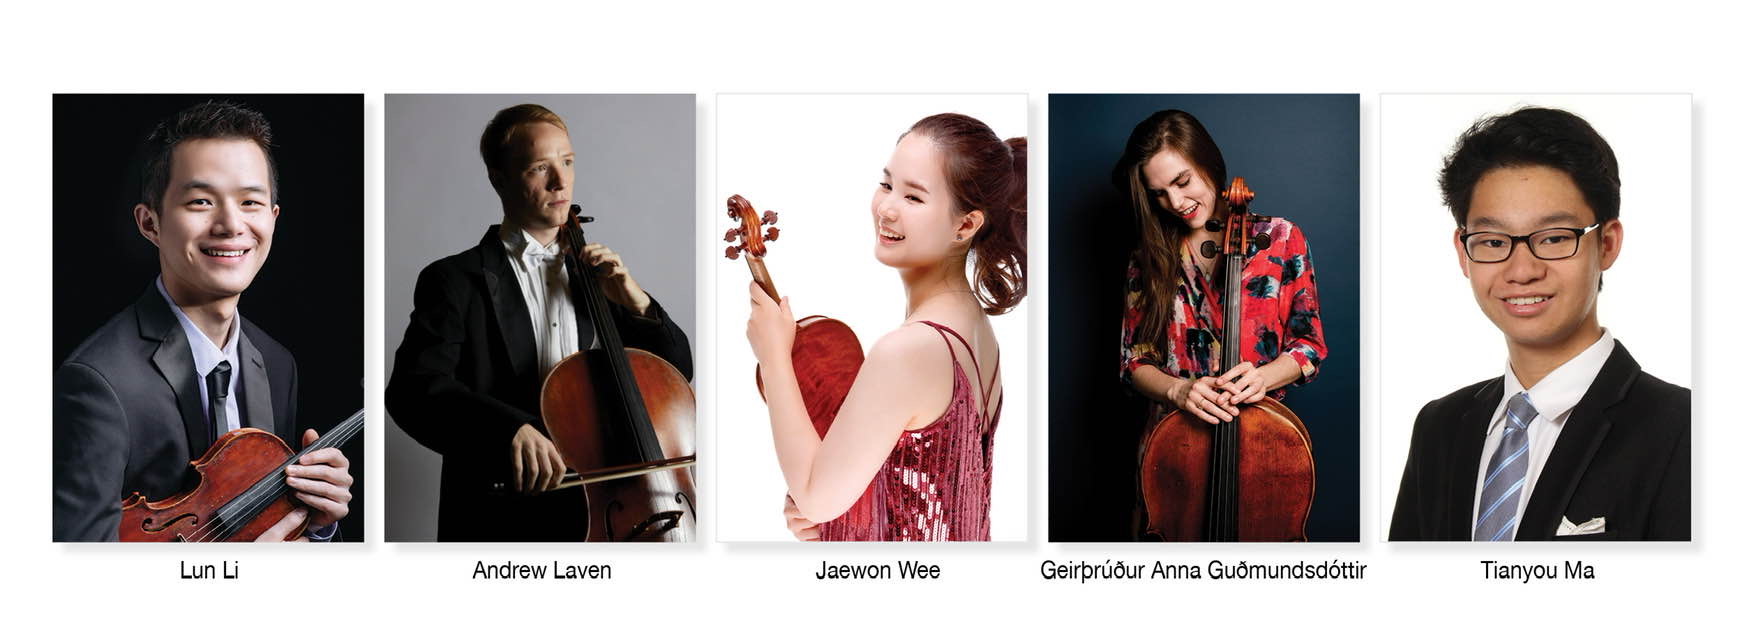 Finalists Announced For New York's 2021 Barbash Solo Bach String Competition - image attachment